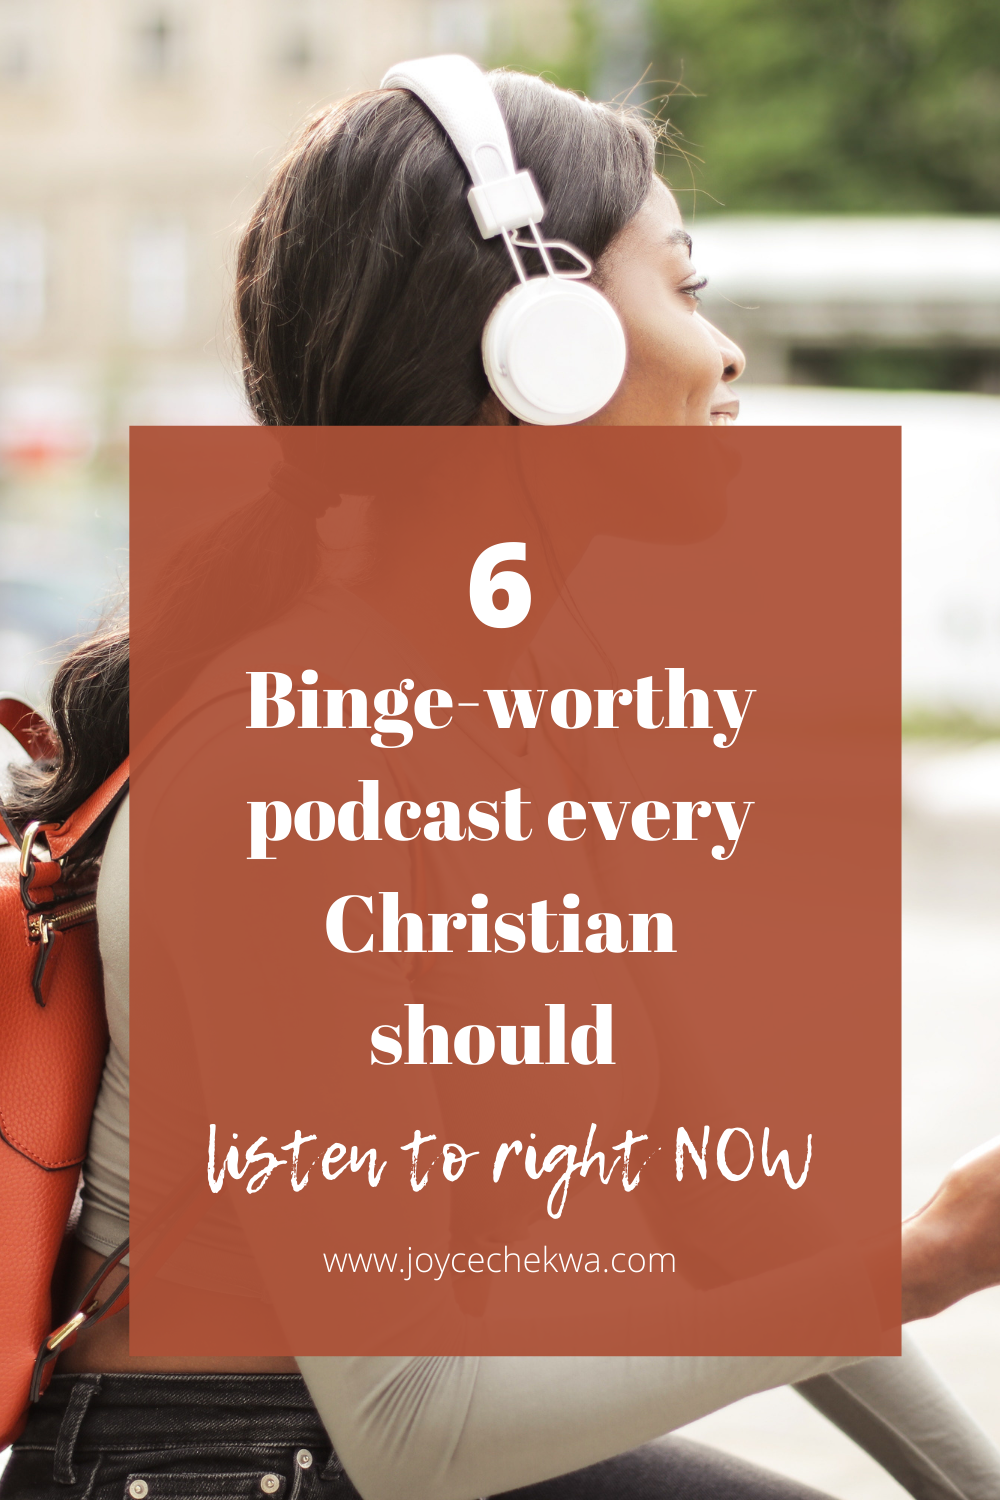 6 BINGE-WORTHY PODCAST EVERY CHRISTIAN SHOULD LISTEN TO RIGHT NOW